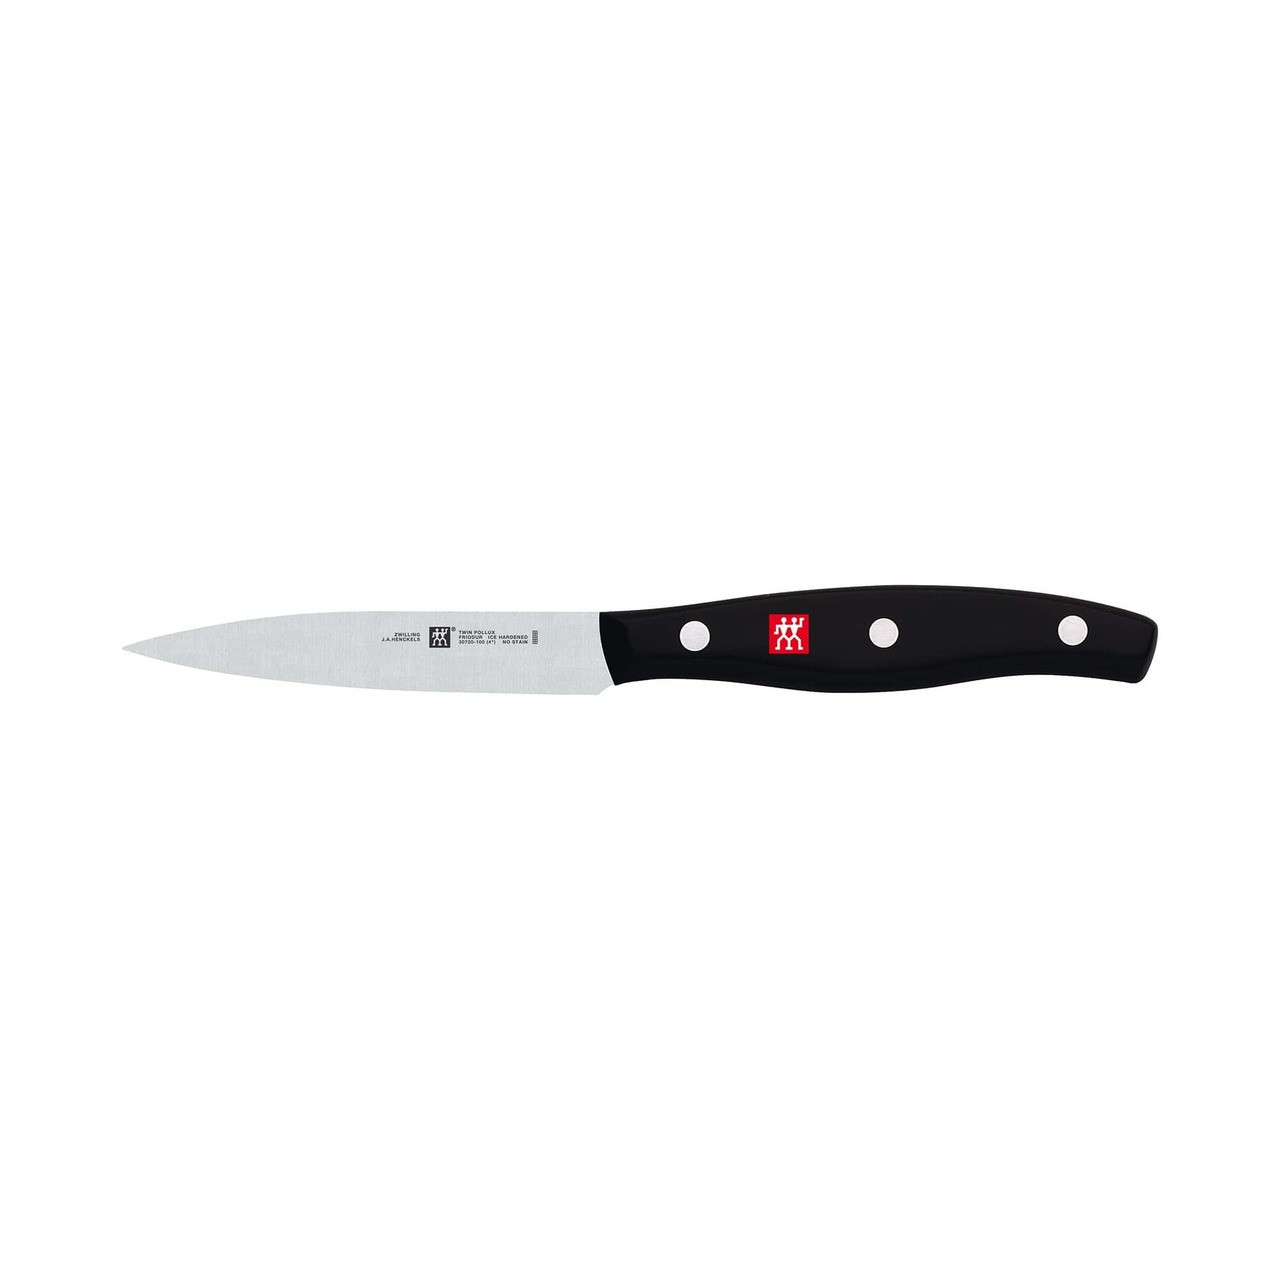  ZWILLING Twin Signature 7-Piece German Knife Set with